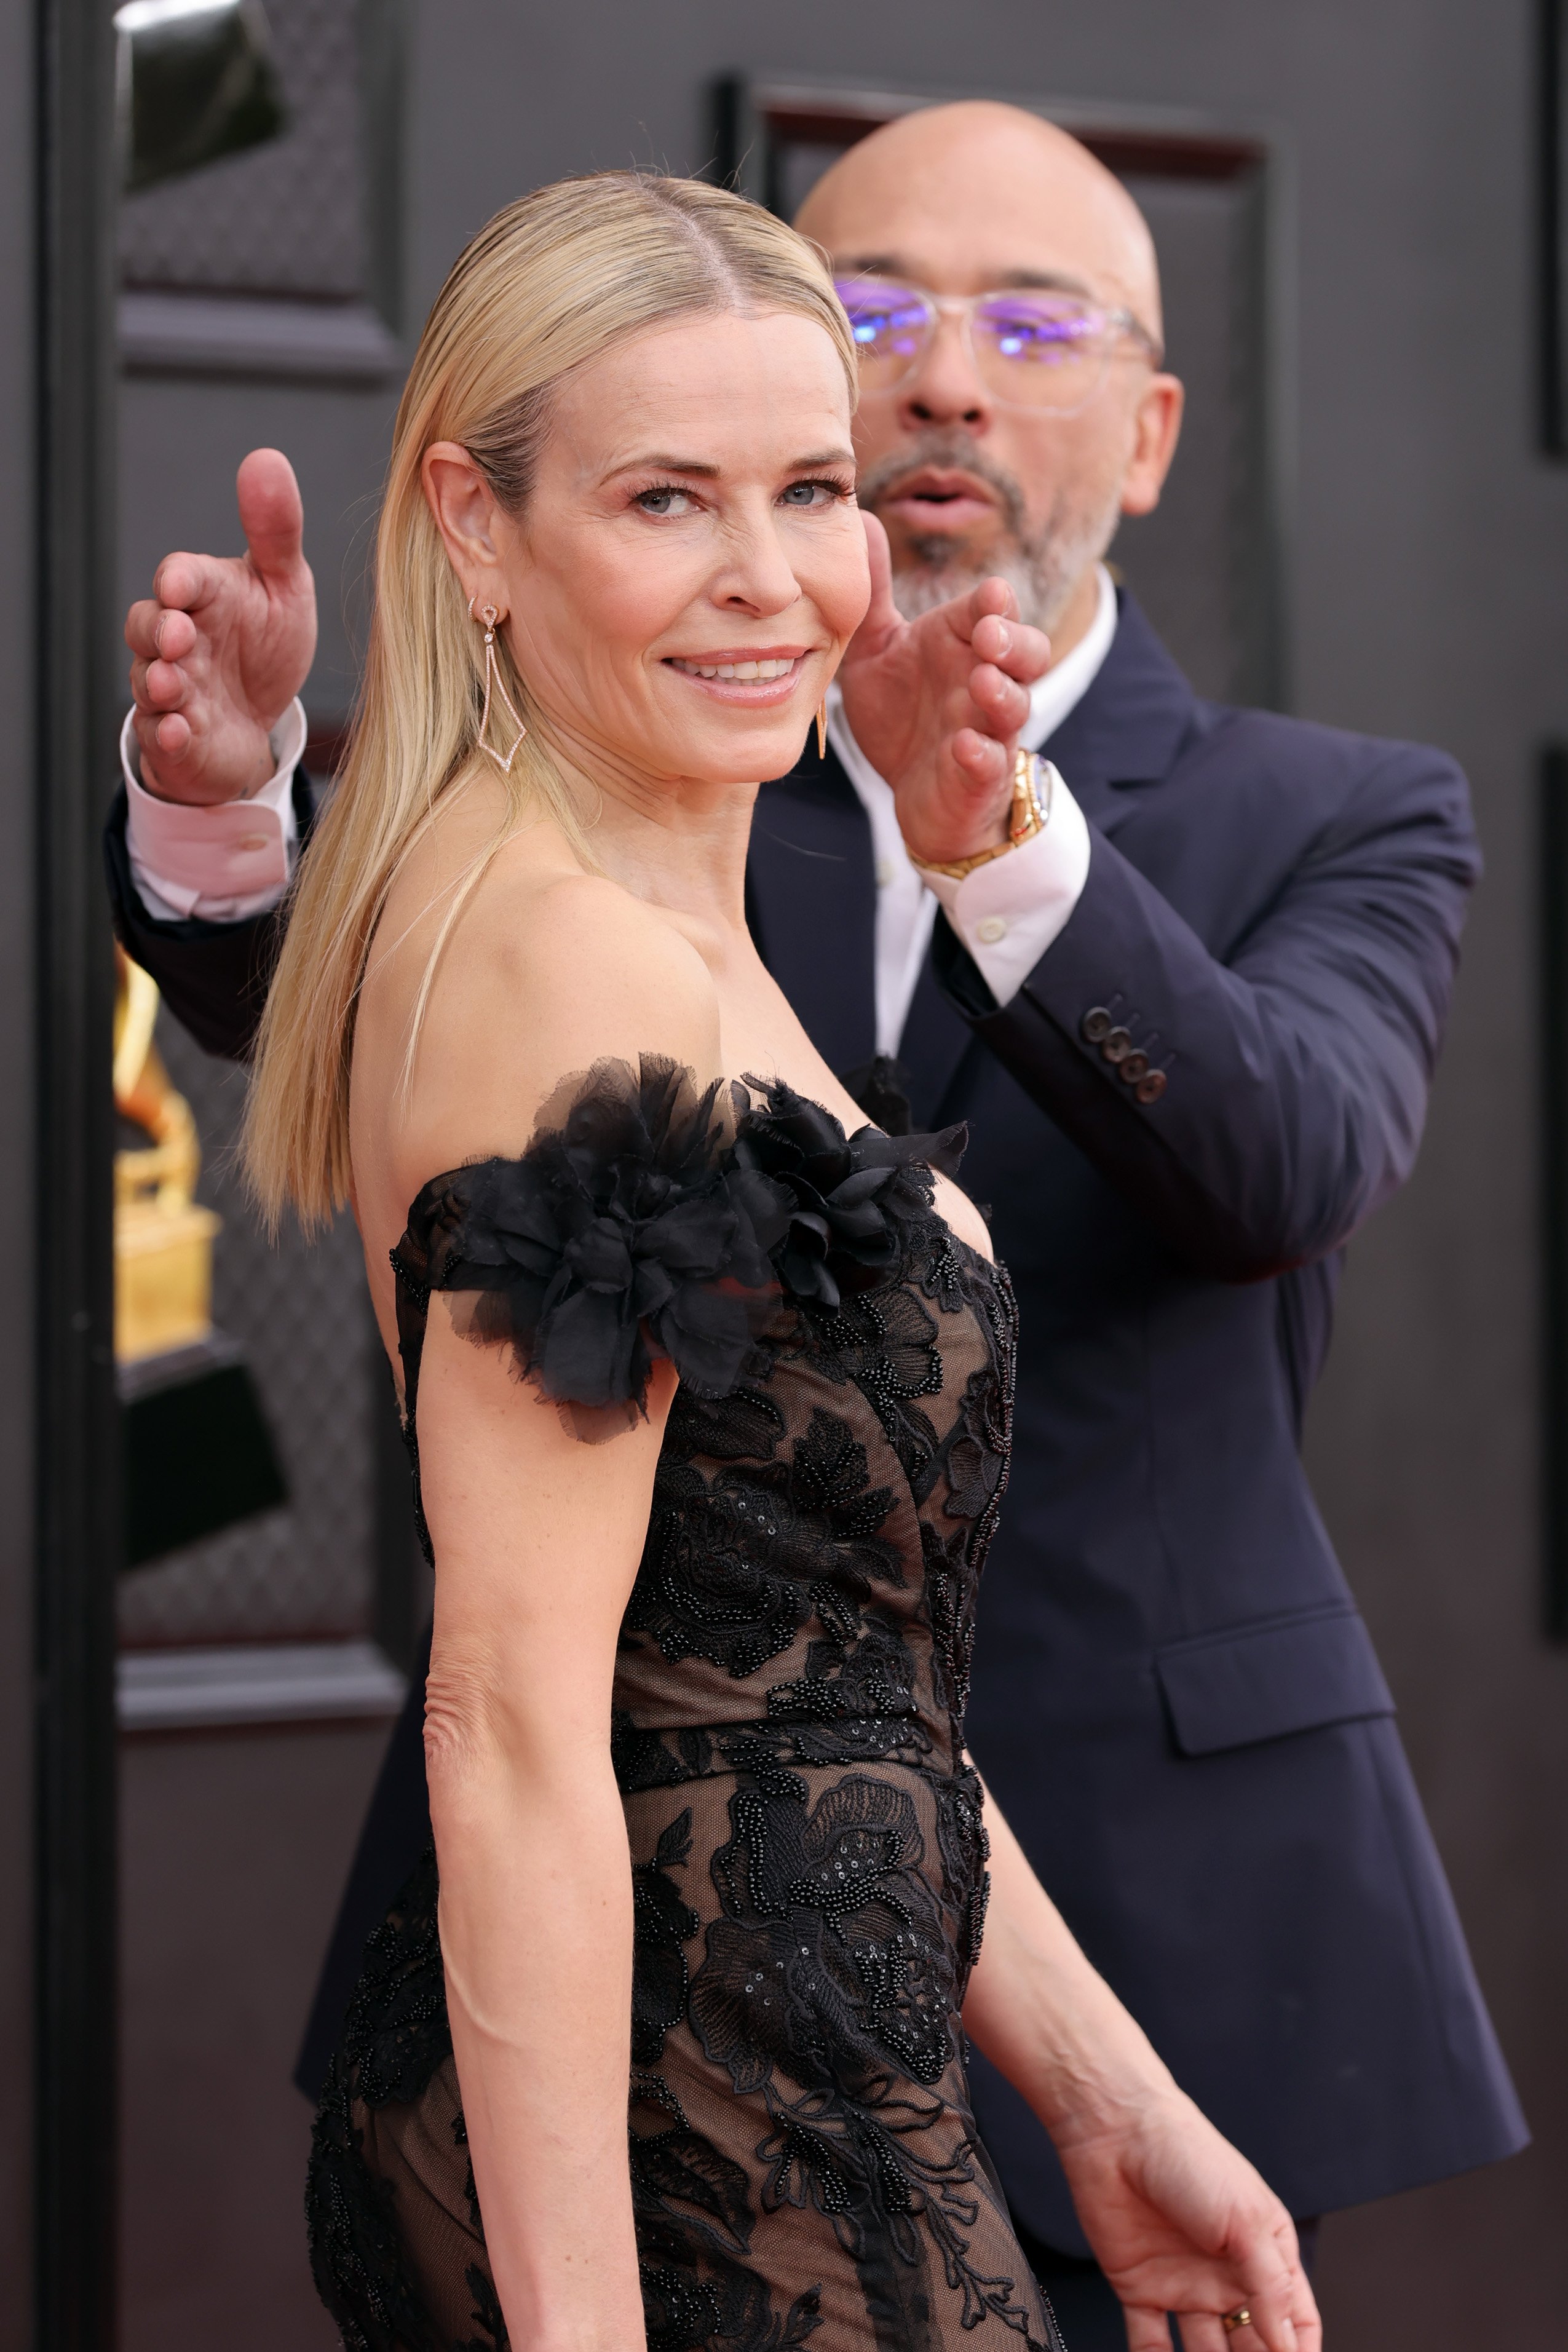 Jo Koy helps girlfriend, Chelsea Handler fix her hair on the red carpet at the Grammy Awards